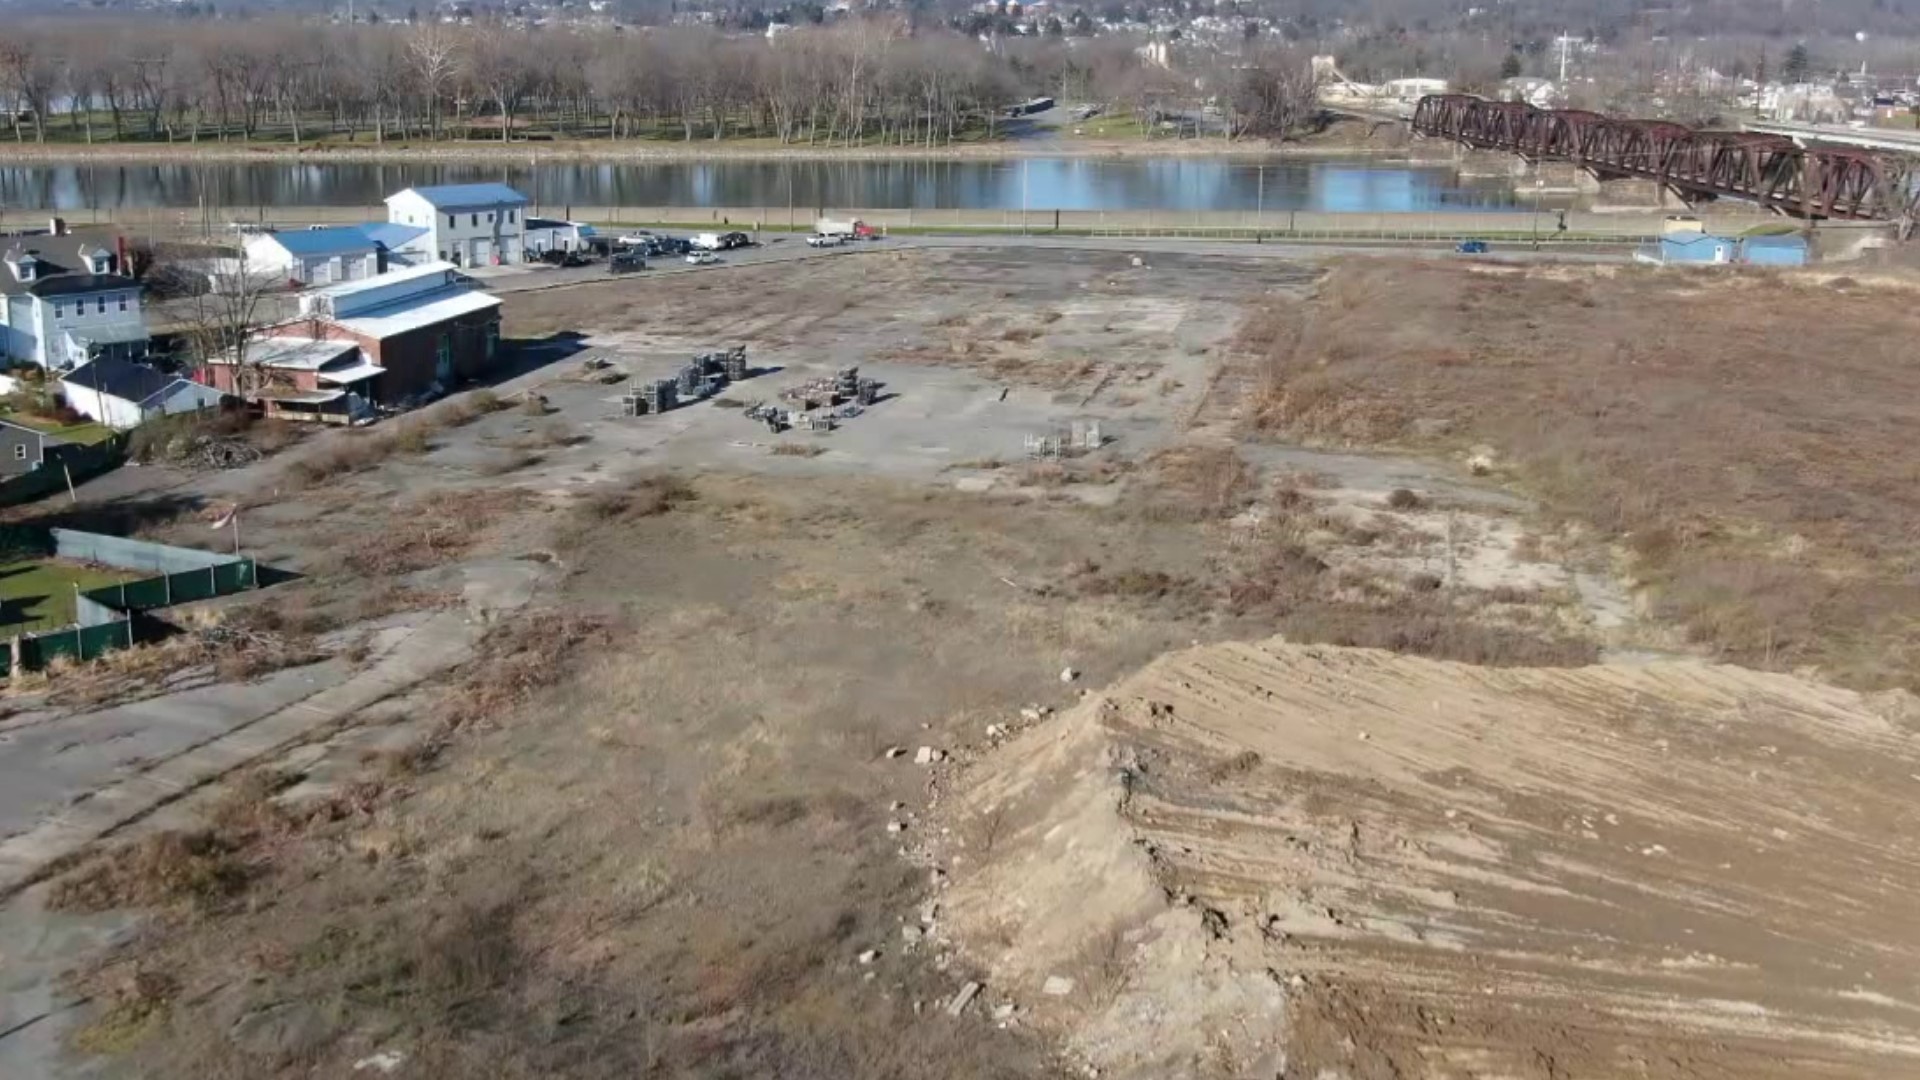 The city of Sunbury was given a $2 million grant to redevelop the former Celotex site.